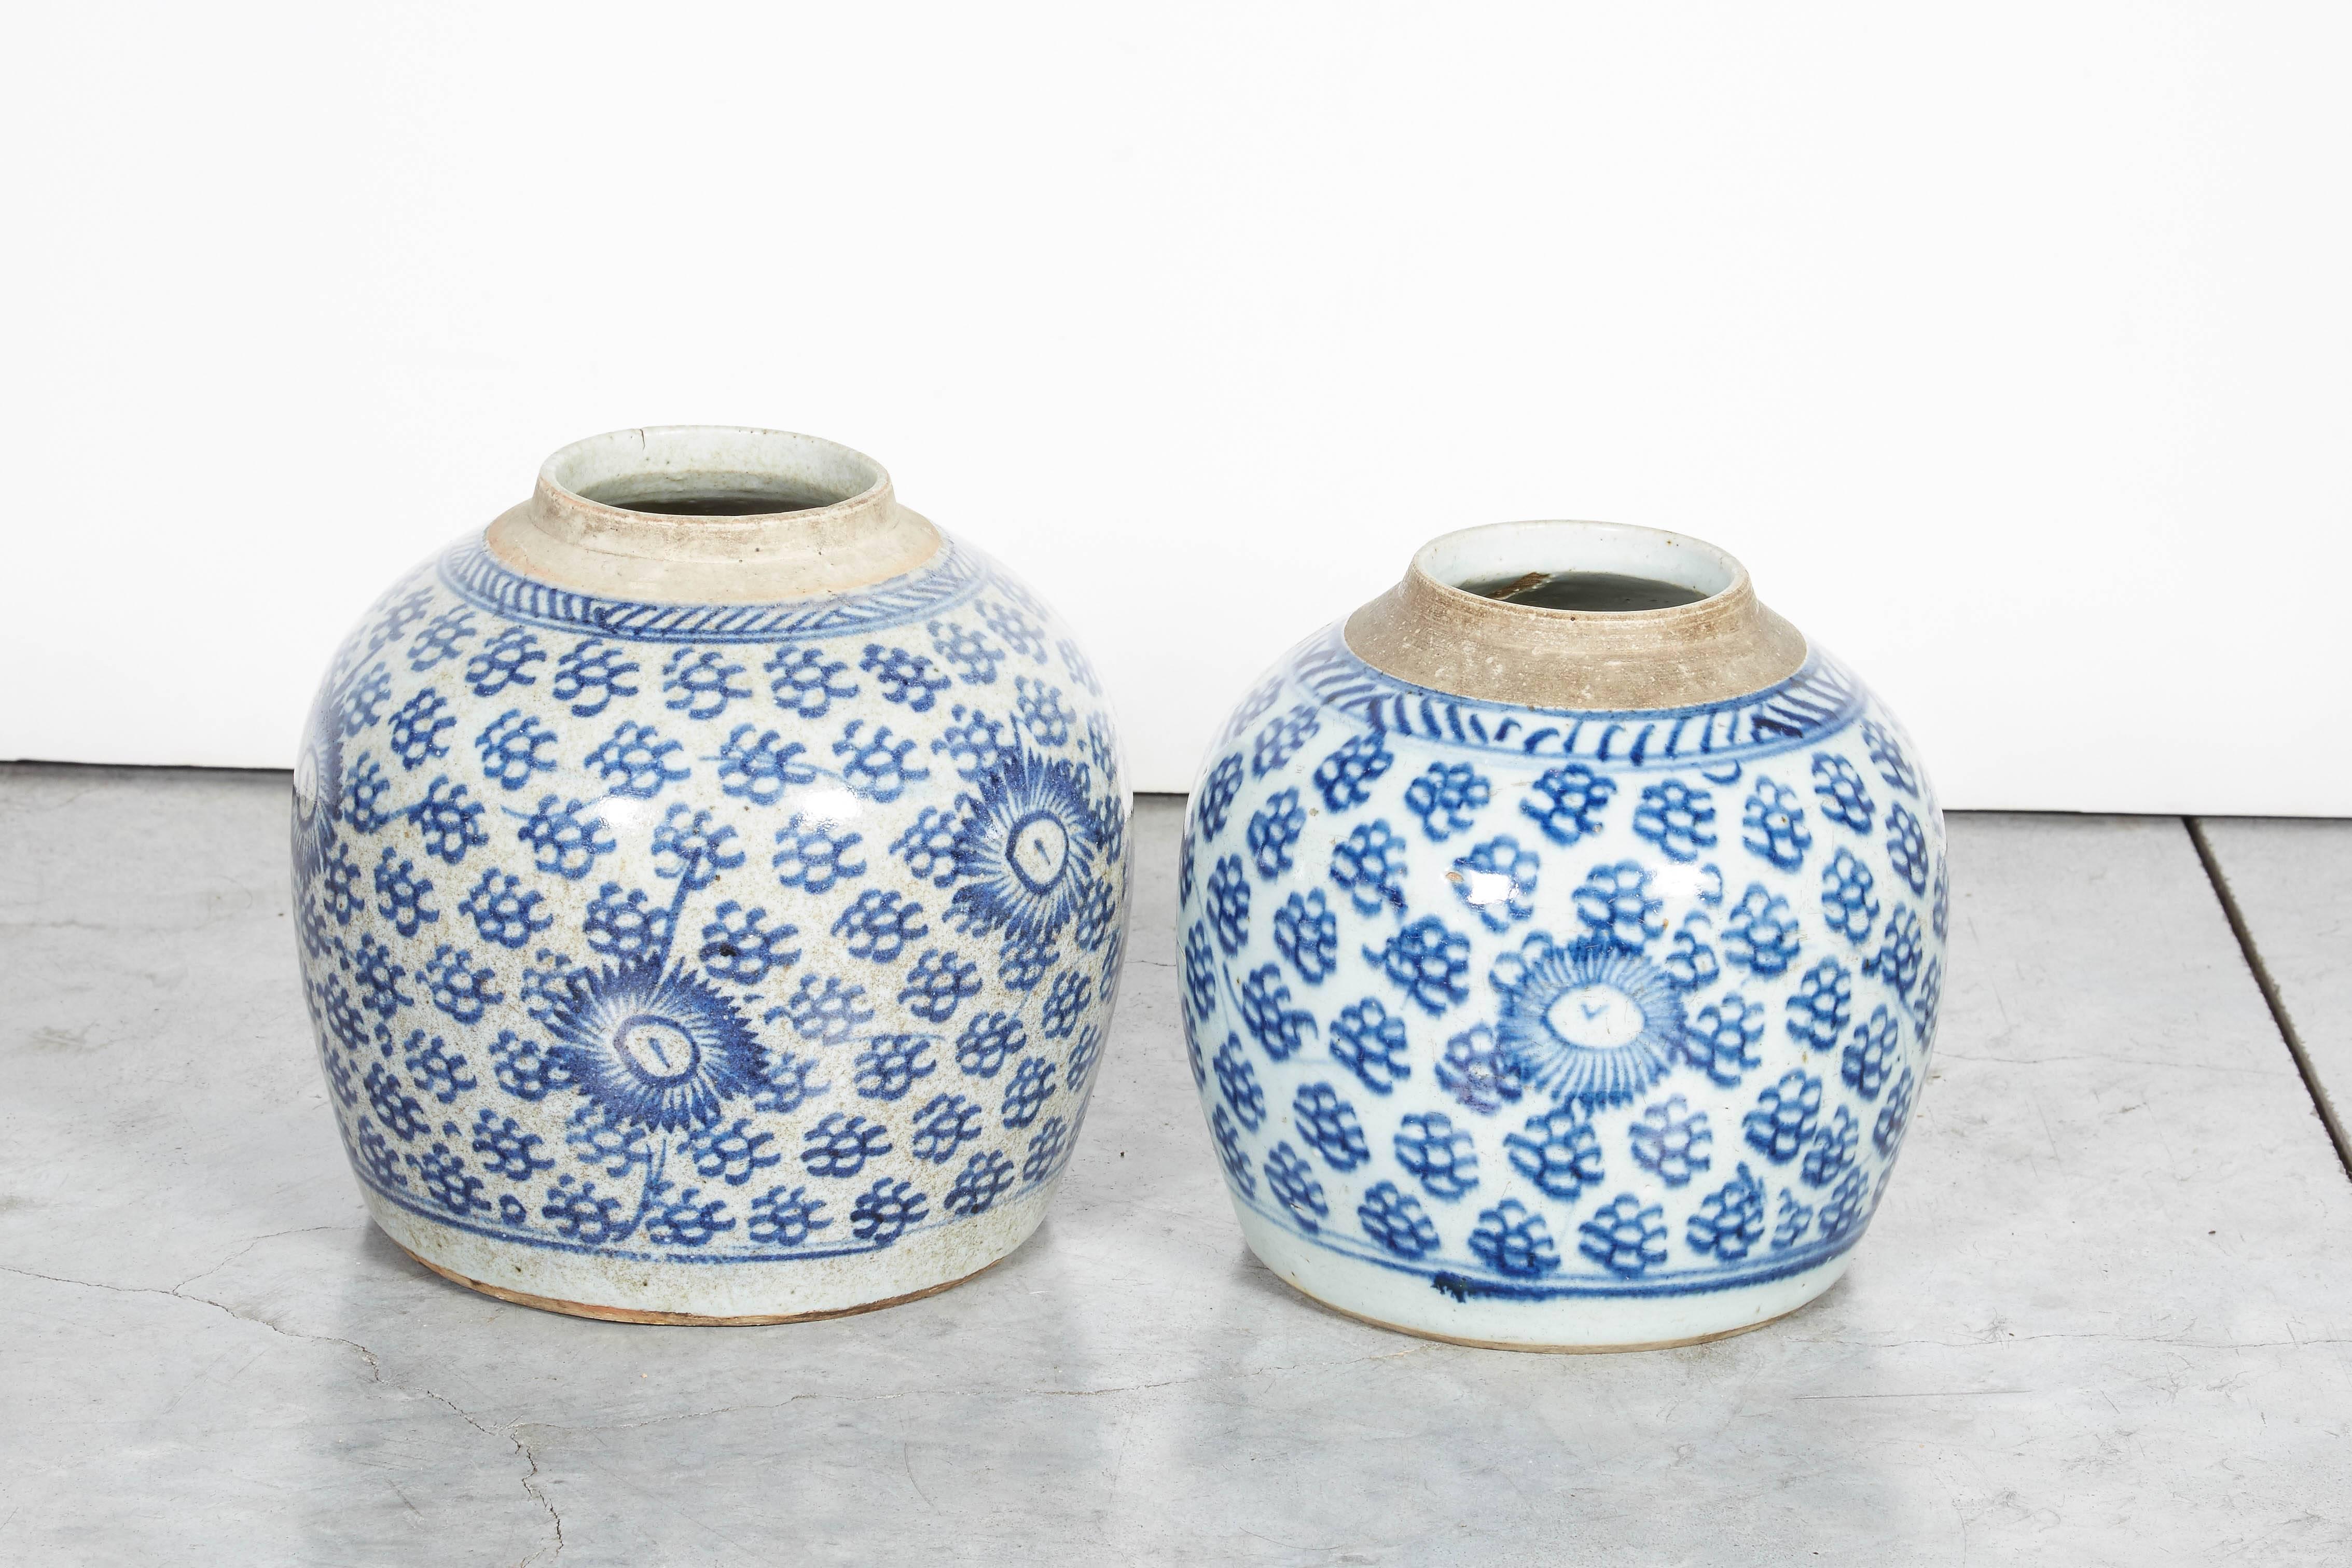 Two beautifully and subtlely decorated antique Chinese porcelain ginger jars. These pieces will be striking on any shelf or table. From Shanxi Province, circa 1850.
CR517.

Only one piece remaining.